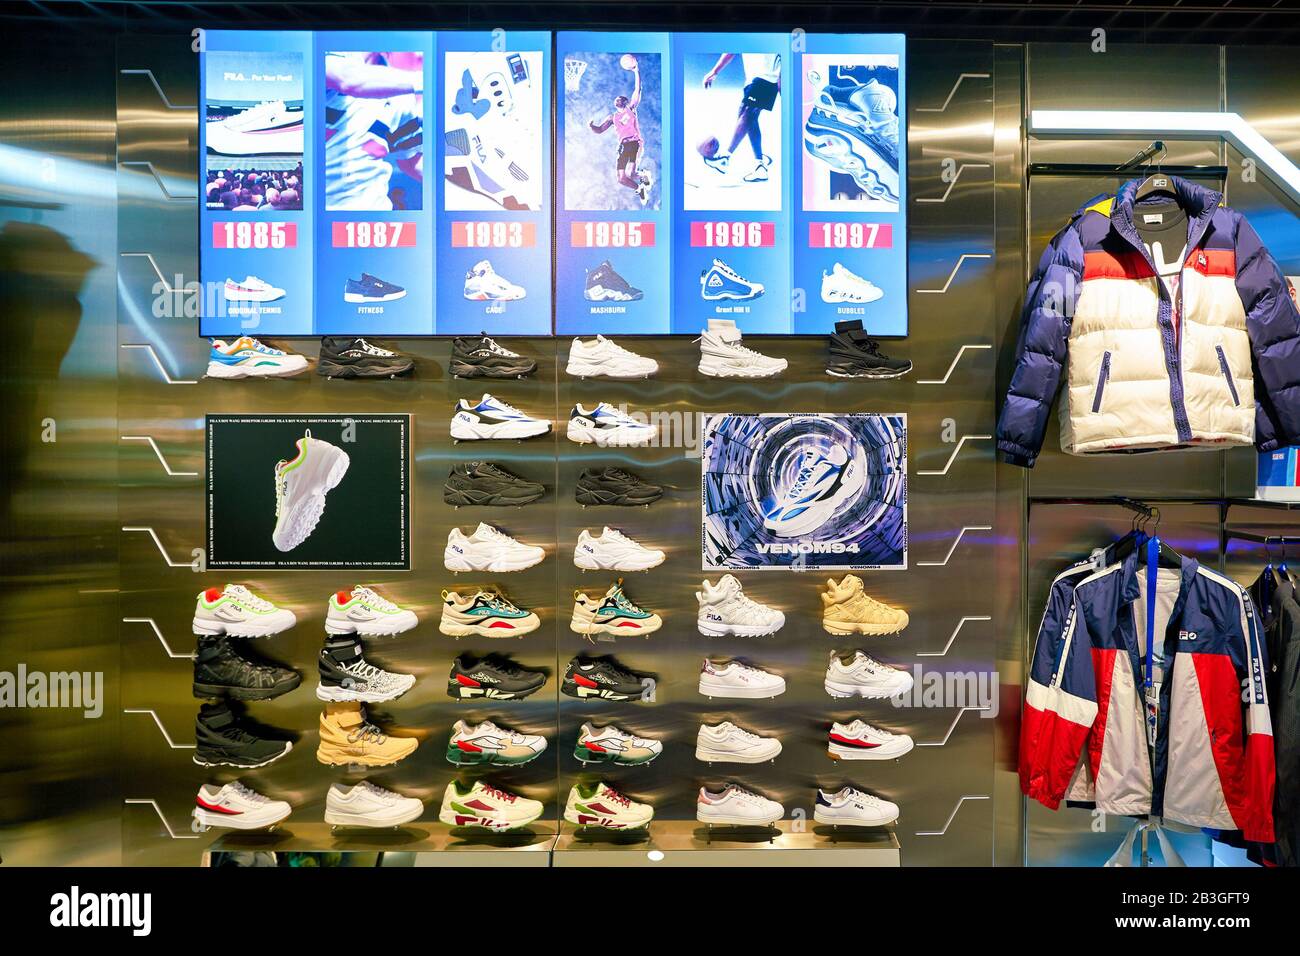 HONG KONG, CHINA - CIRCA JANUARY, 2019: interior shot of Fila store in  Elements shopping mall. Fila is an Italian sporting goods brand and company  Stock Photo - Alamy